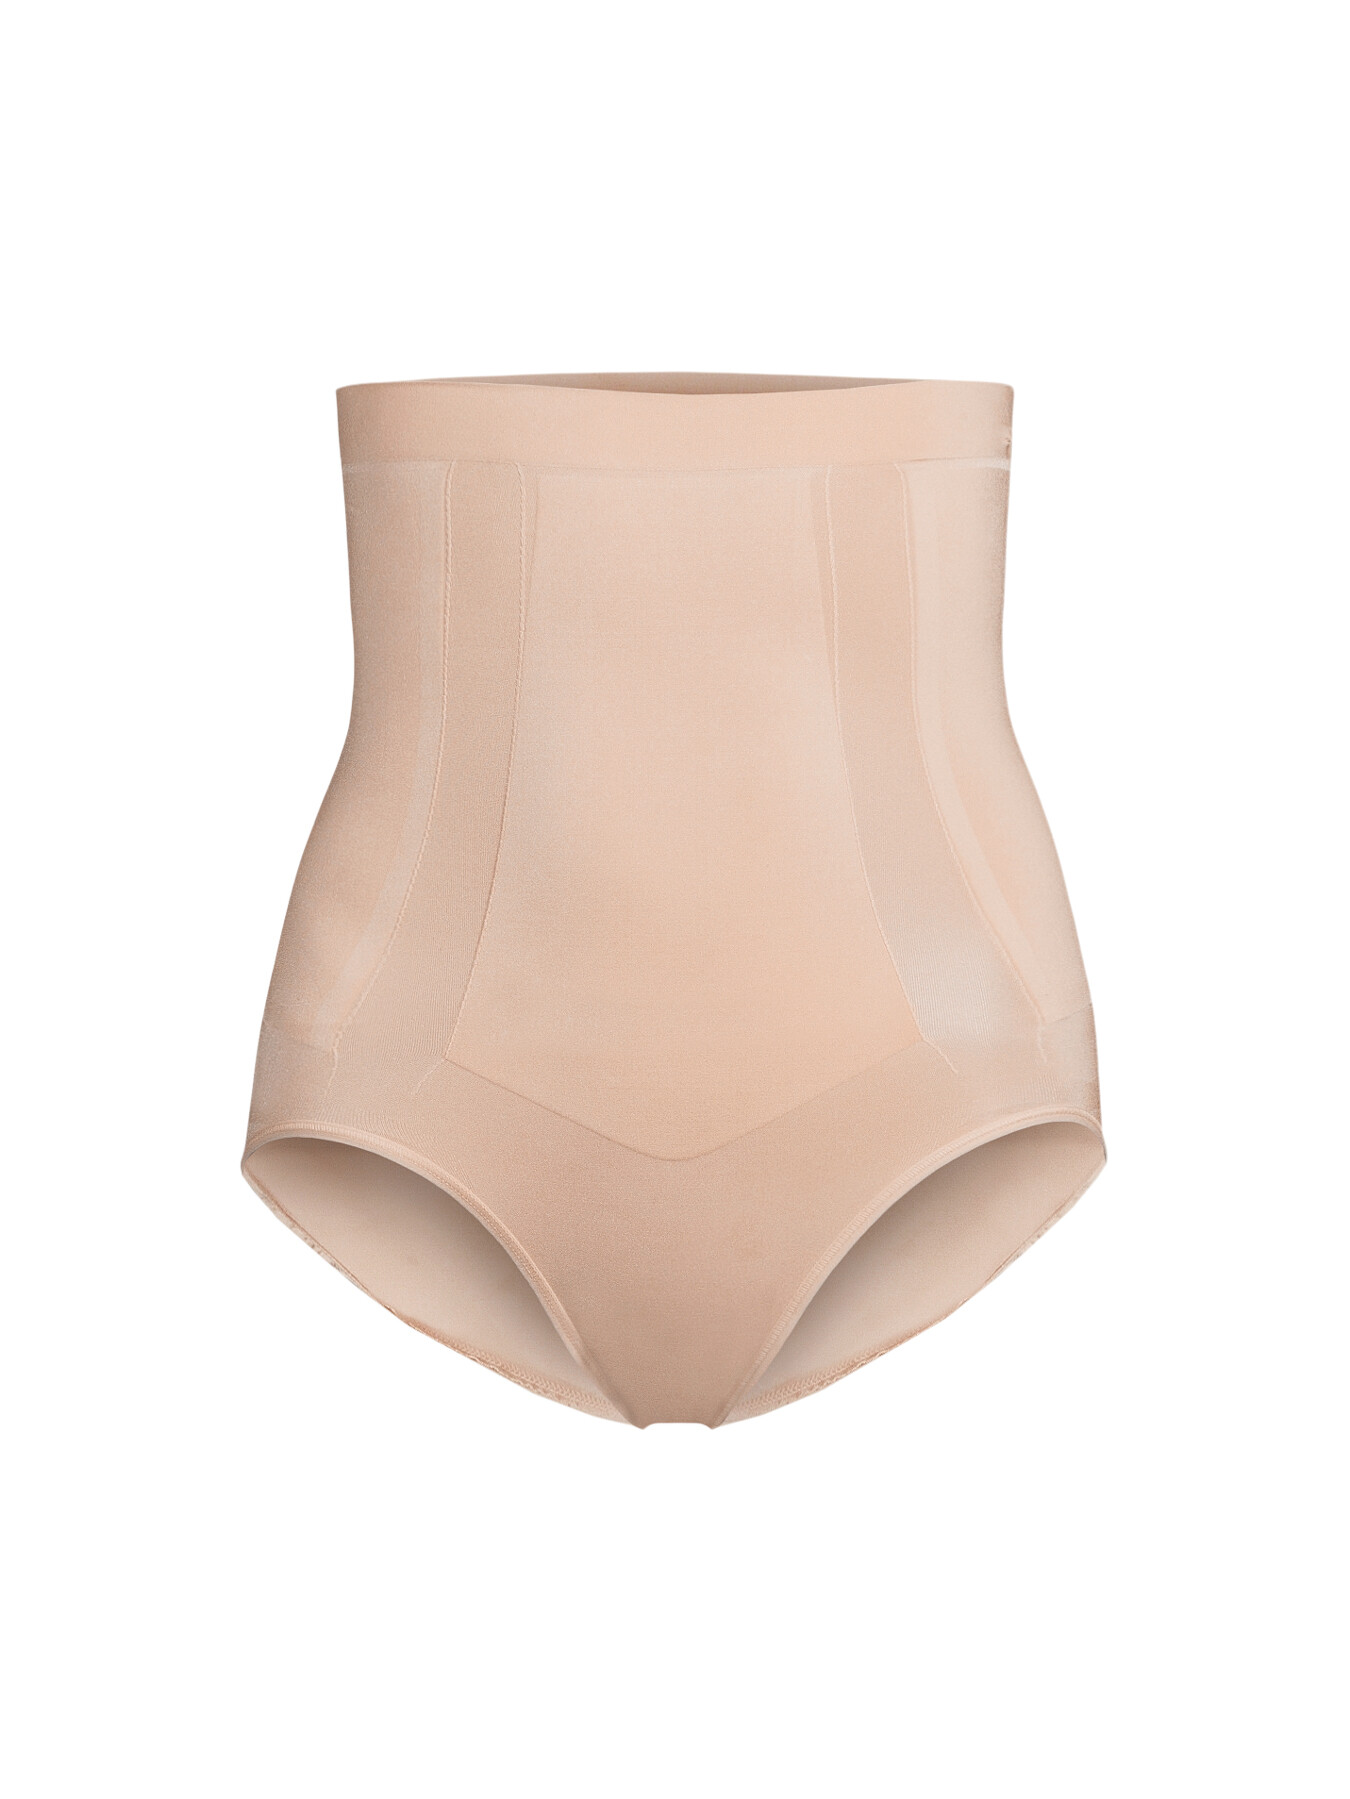 Spanx Women's Oncore High-waisted Brief Nude